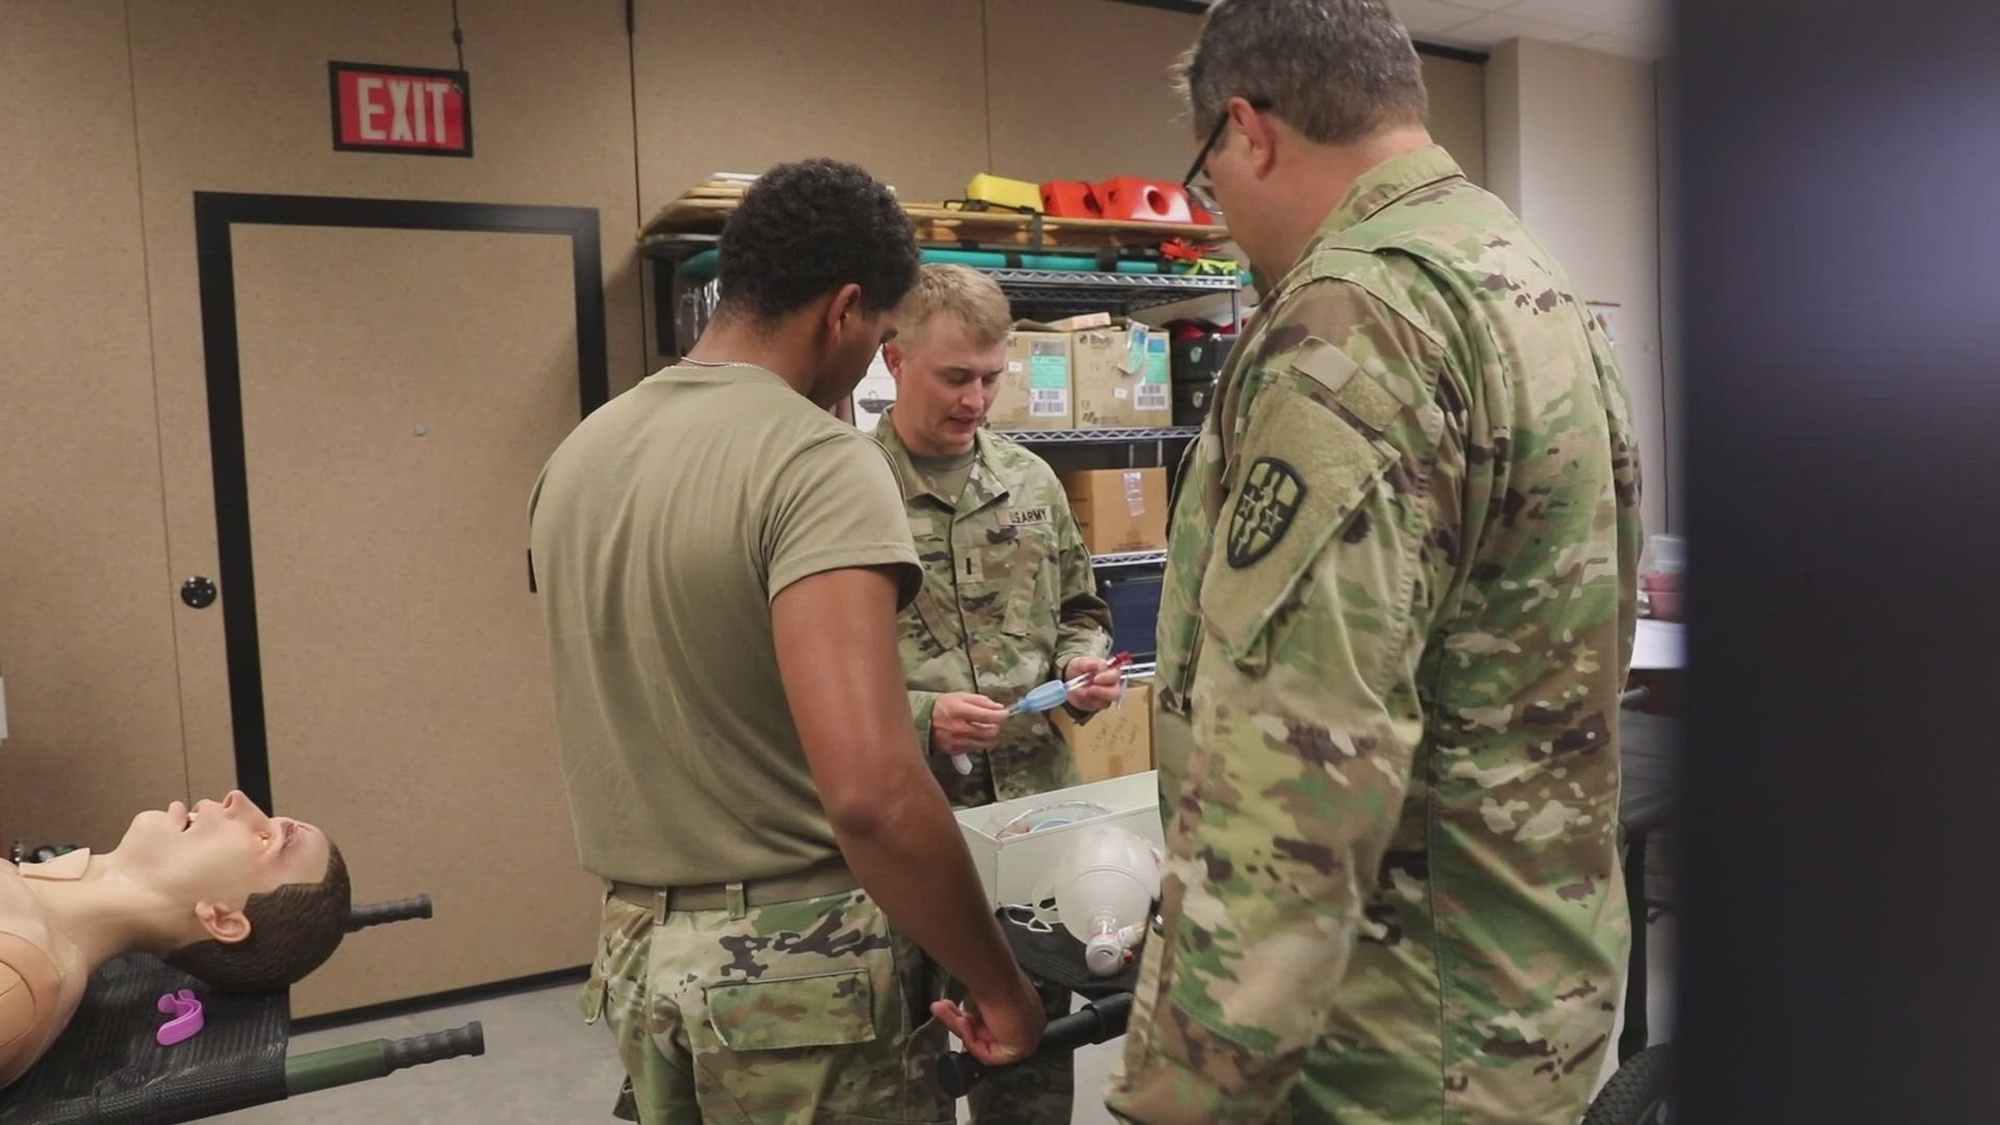 Regional Medic Fort Gordon prepares Soldiers to deploy by putting them in realistic scenarios and promoting skills sustainment.